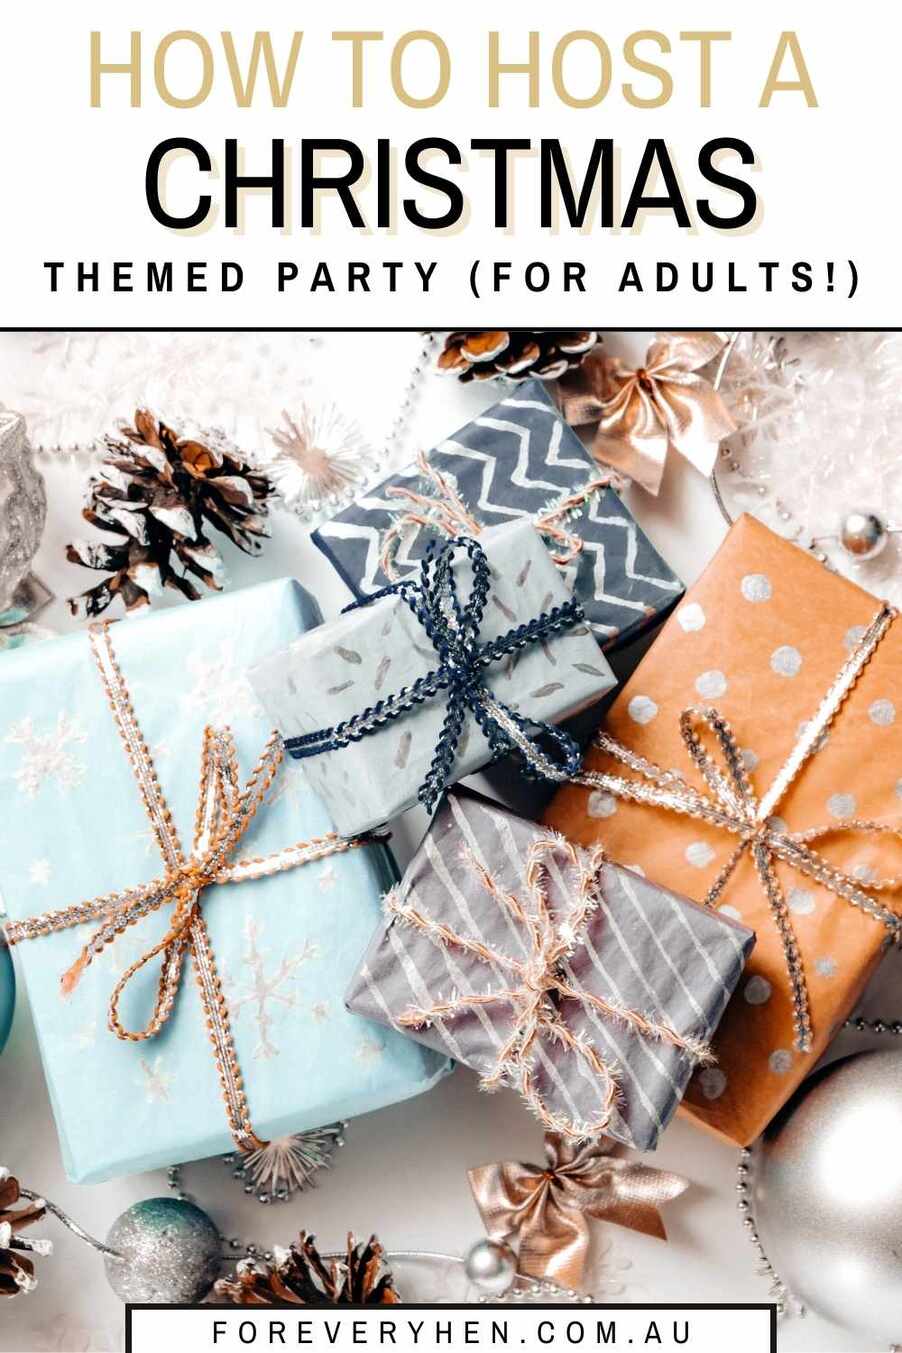 Image of wrapped Christmas gifts surrounded by pinecones. Text overlay: How to host a Christmas themed party (for adults!)